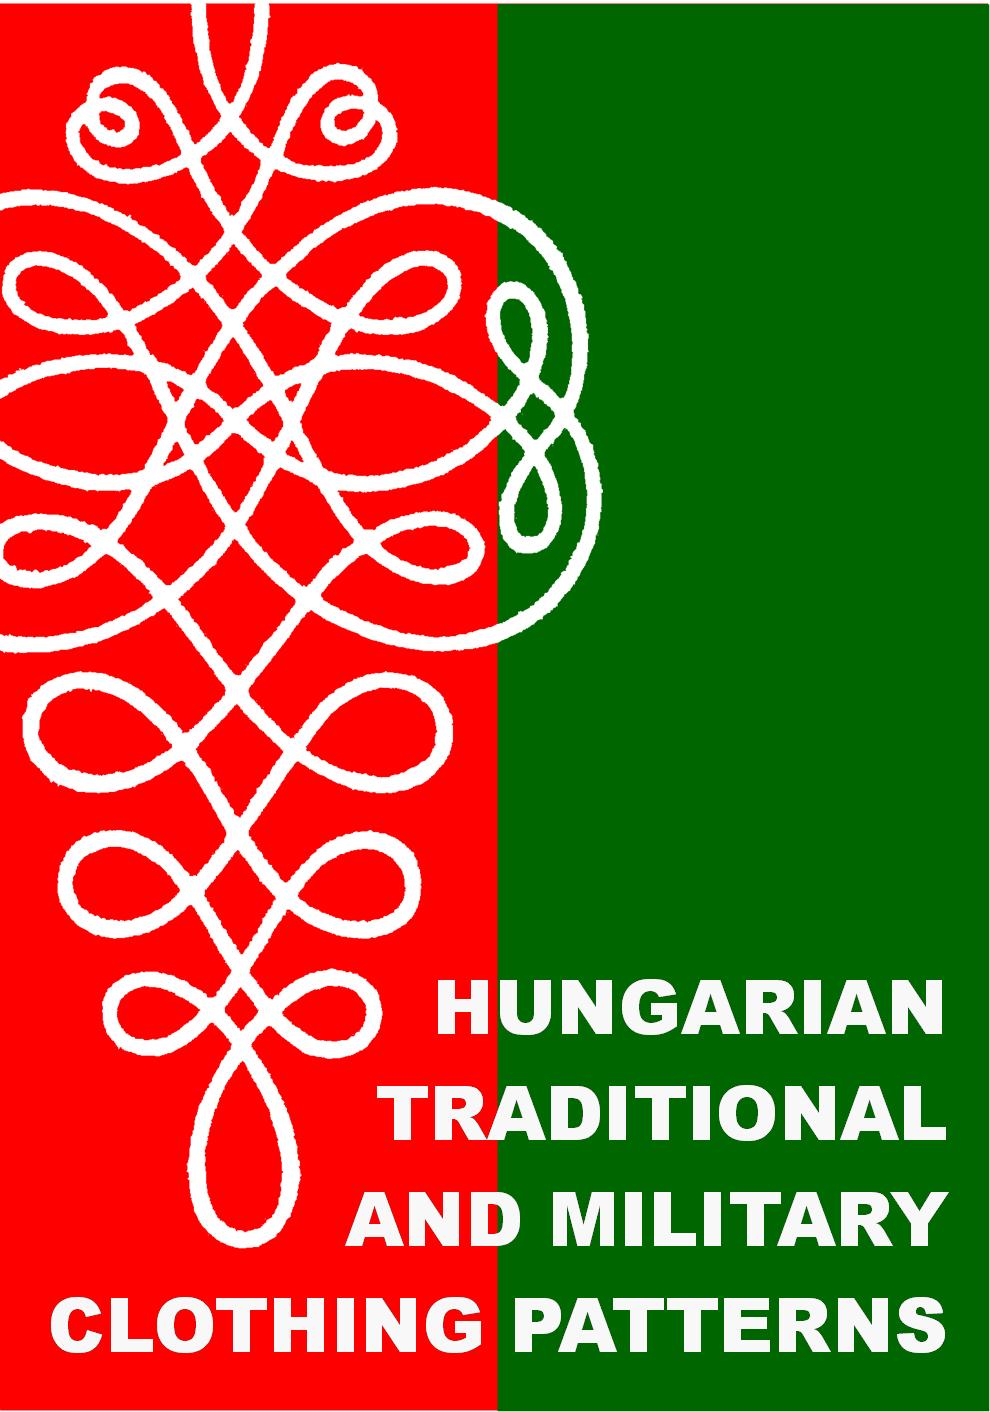 1930s HUNGARIAN TRADITIONAL AND MILITARY CLOTHING PATTERNS